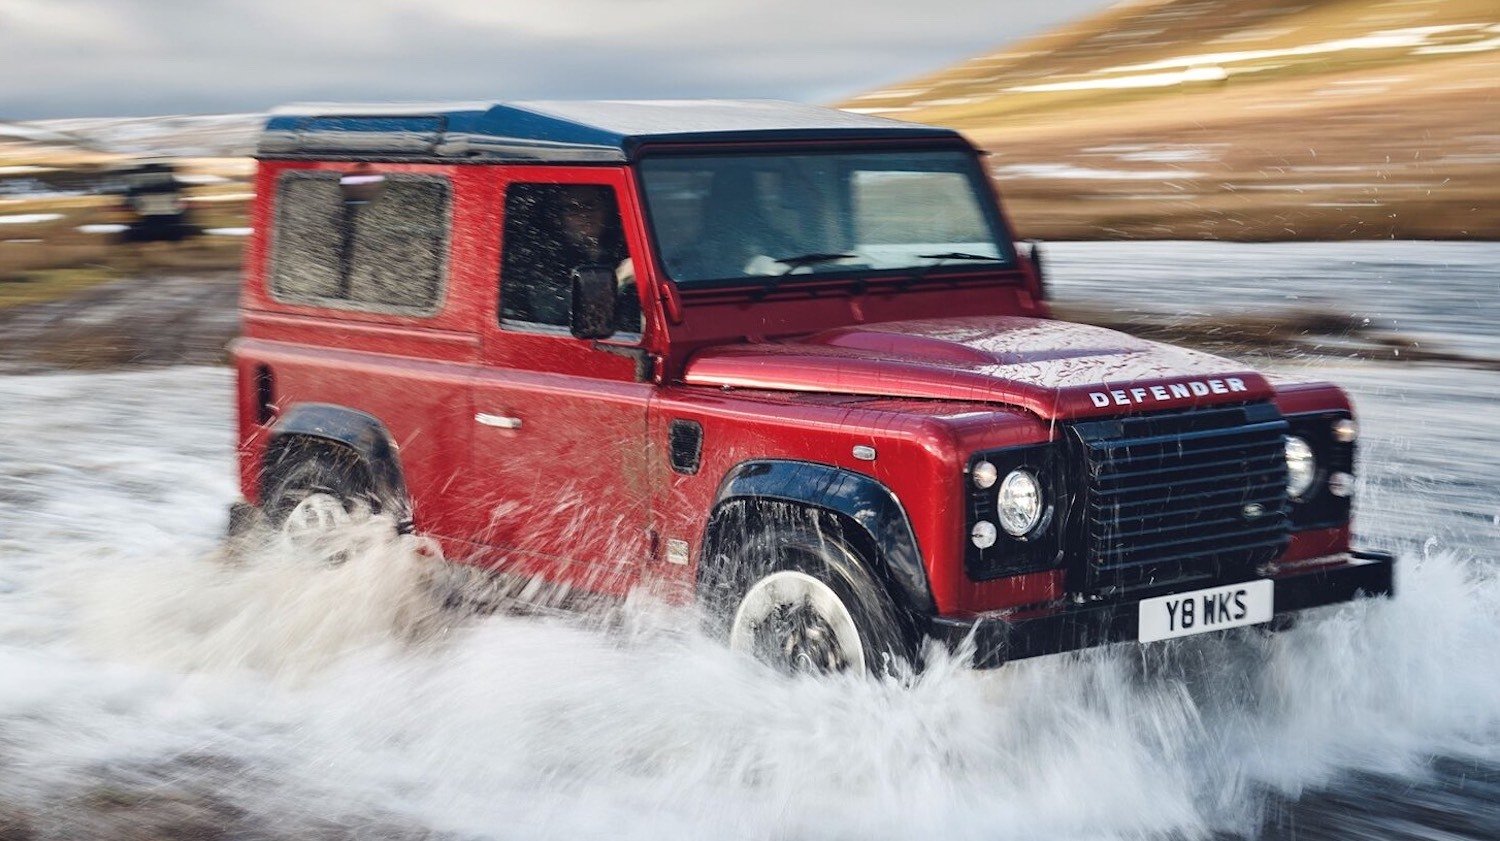 The latest 70th Edition Defender for the JPR 2018 70th Anniversary Celebrations 1